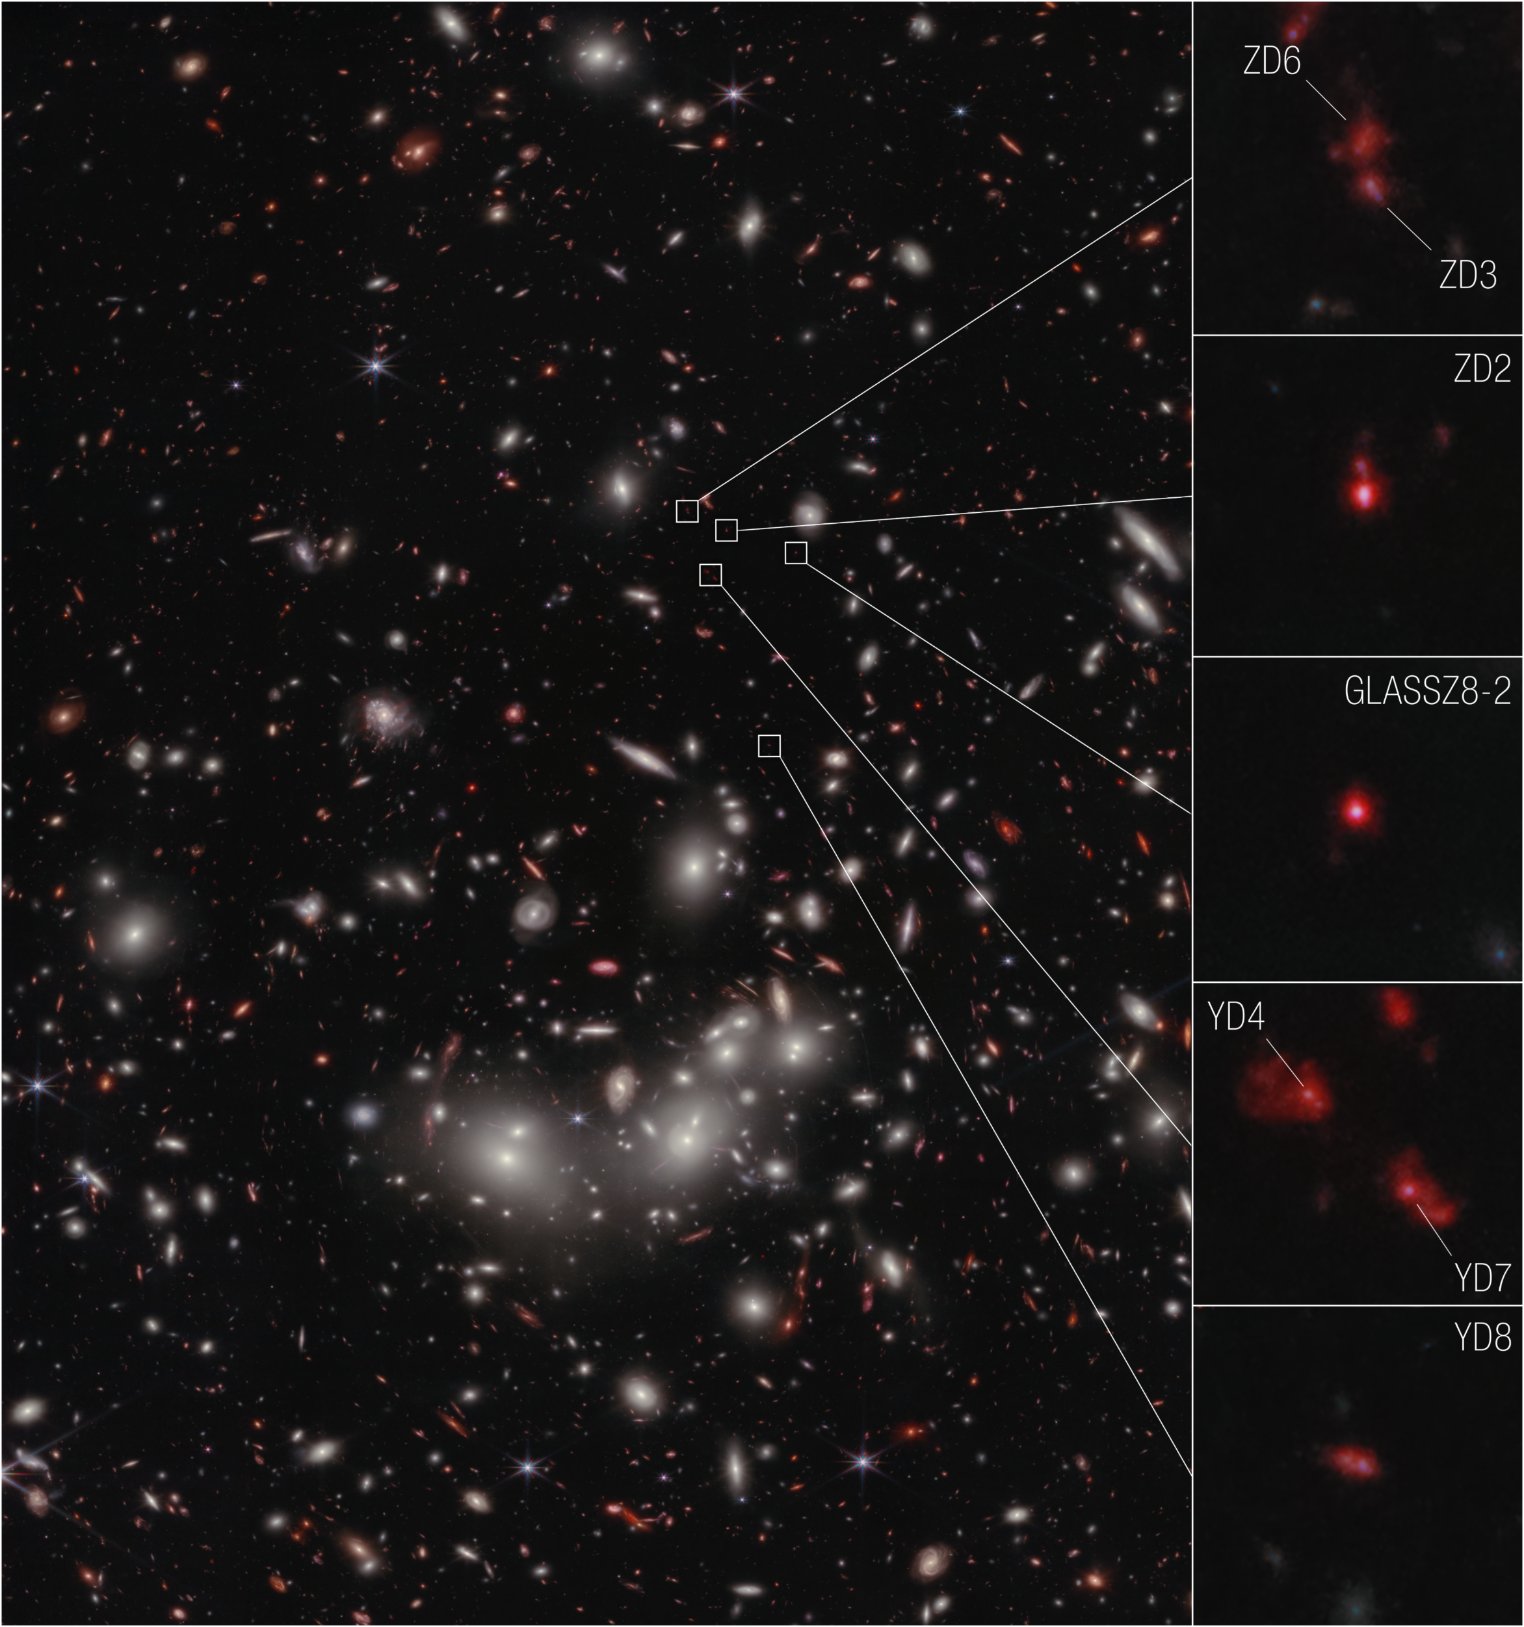 The left side of this image features various galaxies colored orange, red and white on a black background. Most of the white galaxies have a hazy halo. A prominent, glowing group of larger white galaxies appears below center. In the top half, five small white squares highlight very faint and tiny red galaxies that would not stand out otherwise, with lines radiating from the small squares to a stacked column of five squares on the right side of the image. This column provides a zoomed-in view of seven specific galaxies, all appearing as red smudges or dots. The top square shows two galaxies labeled ZD6 and ZD3. The next square down shows a galaxy labeled ZD2. The third square down shows one galaxy labeled GlassZ8-2. The fourth square down shows two galaxies labeled YD4 and YD7. Finally, the bottom square shows one galaxy labeled YD8.